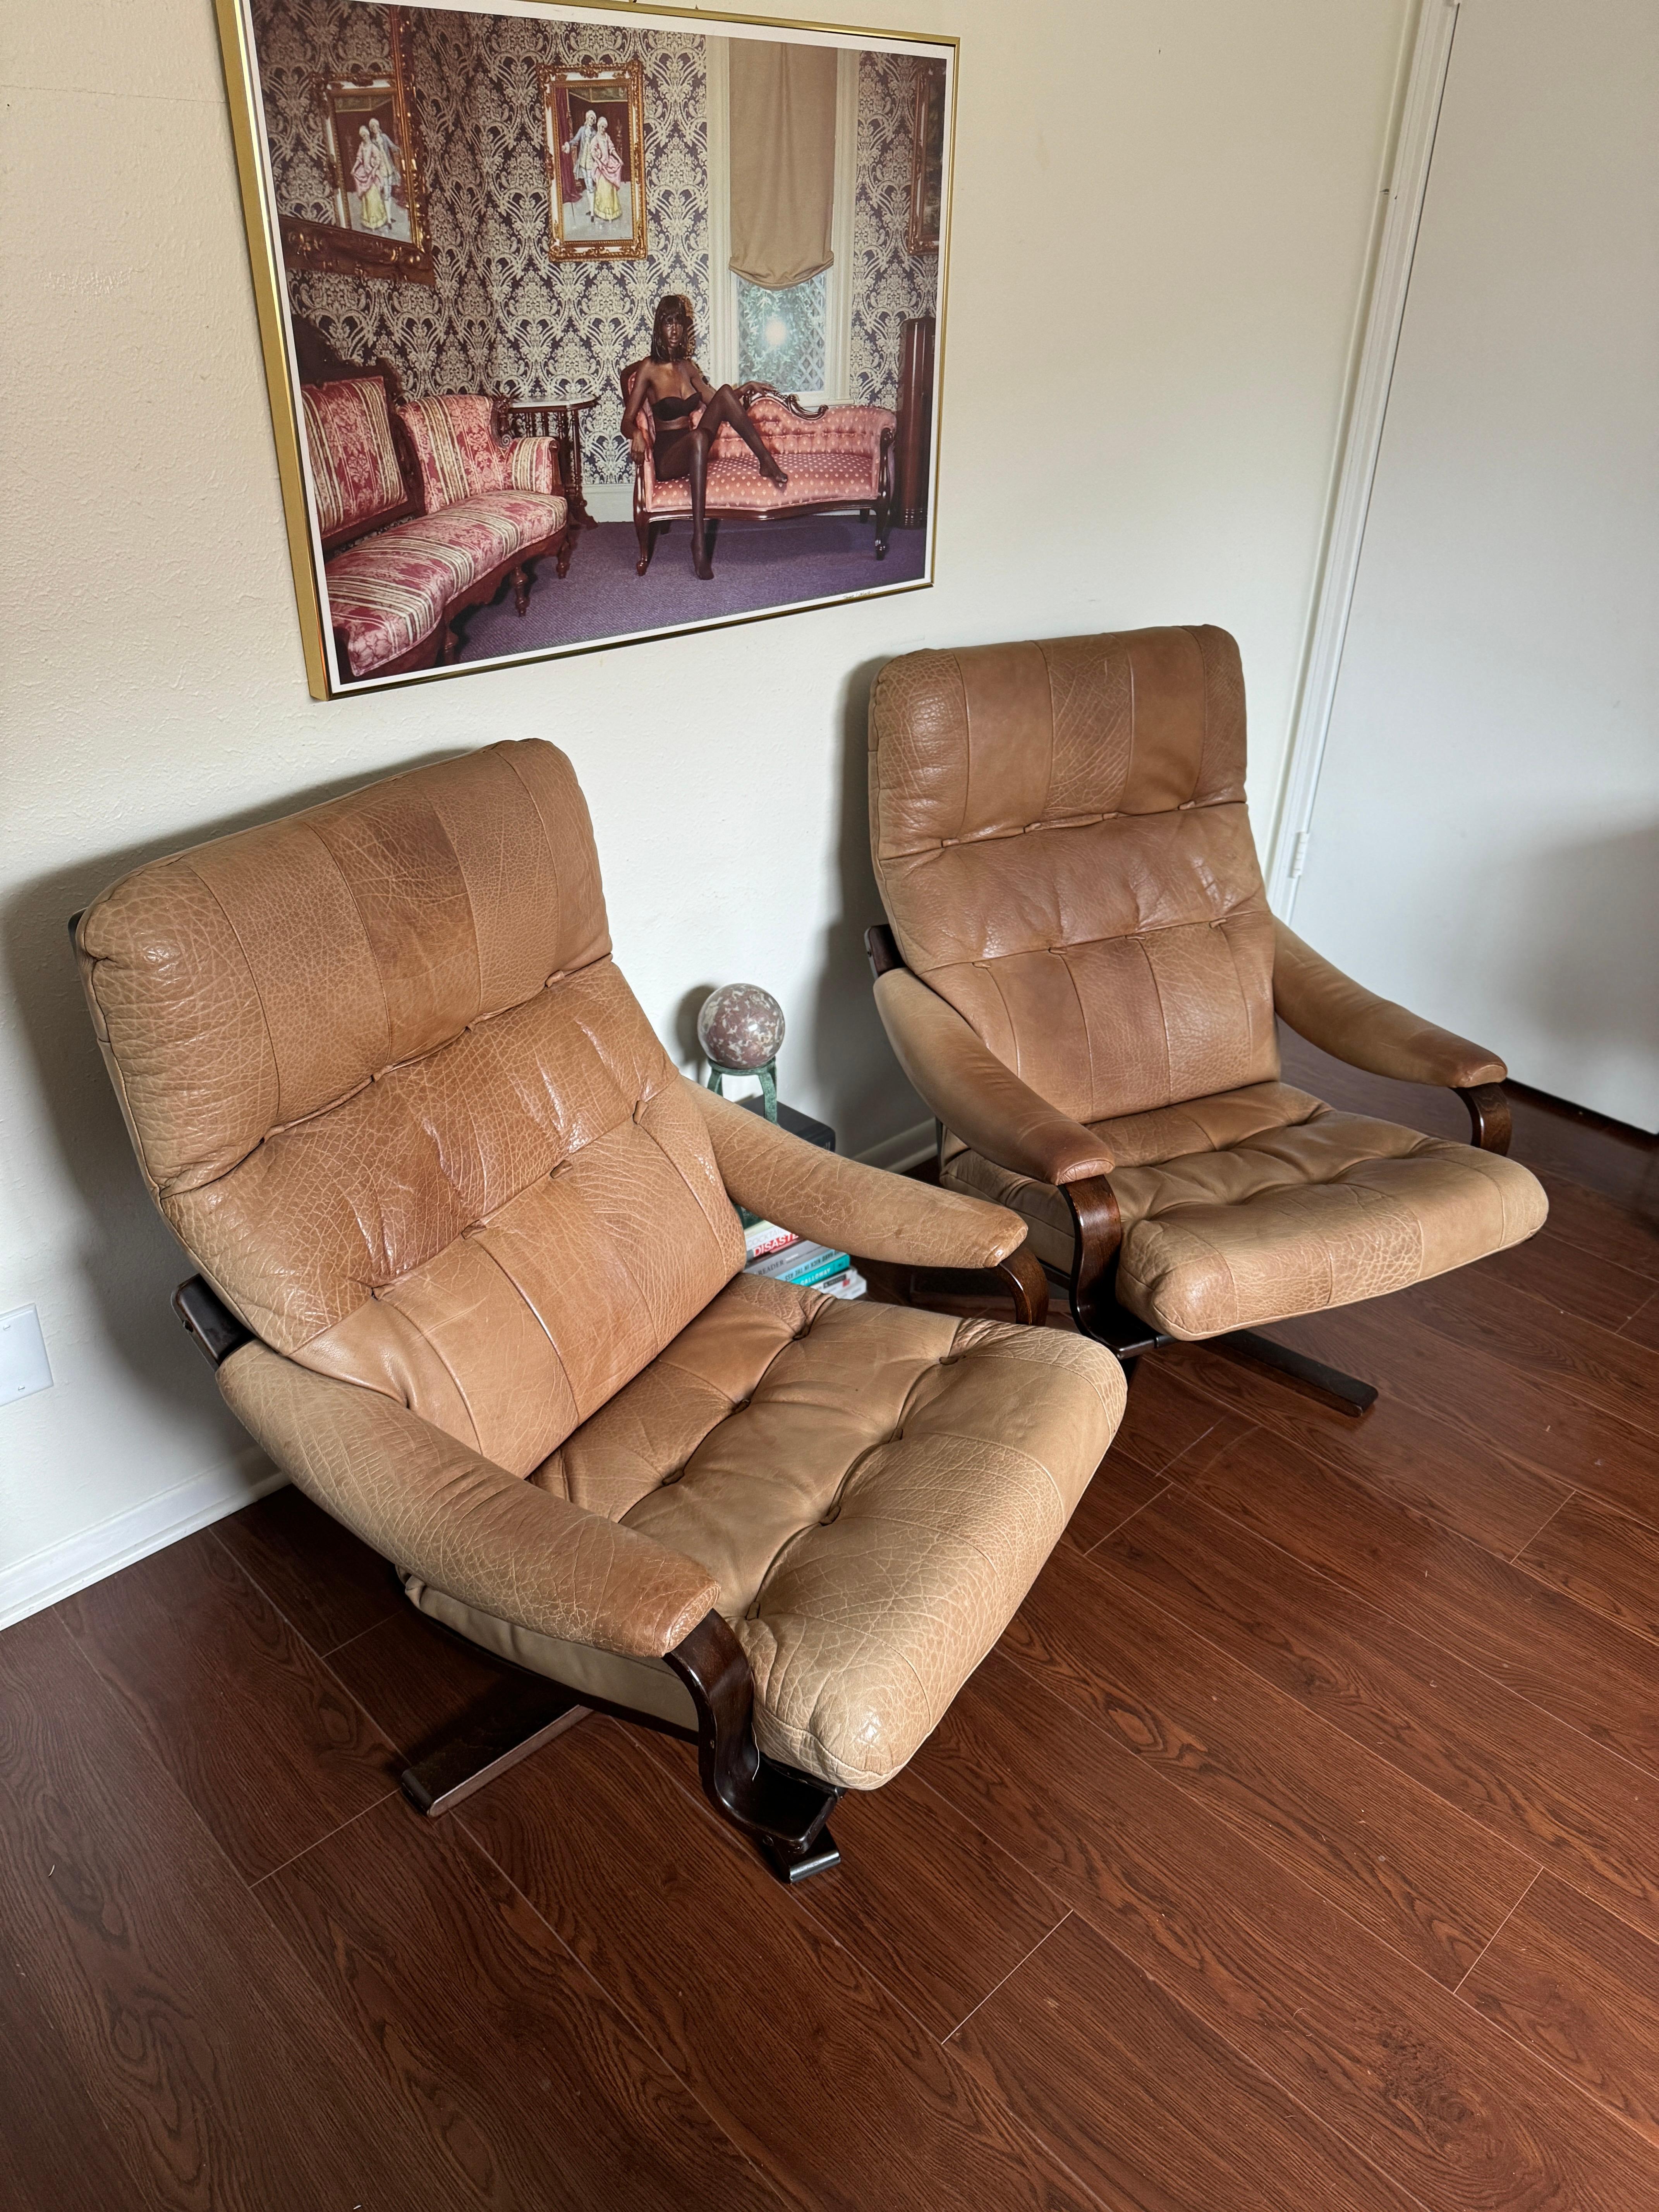 Lovely set of bentwood lounge chairs, circa 1970s. The leather is perfectly buttery and aged. Not only can you melt into these chairs because they’re so comfortable, but they swivel too! Overall in very good original condition. Structurally sound.